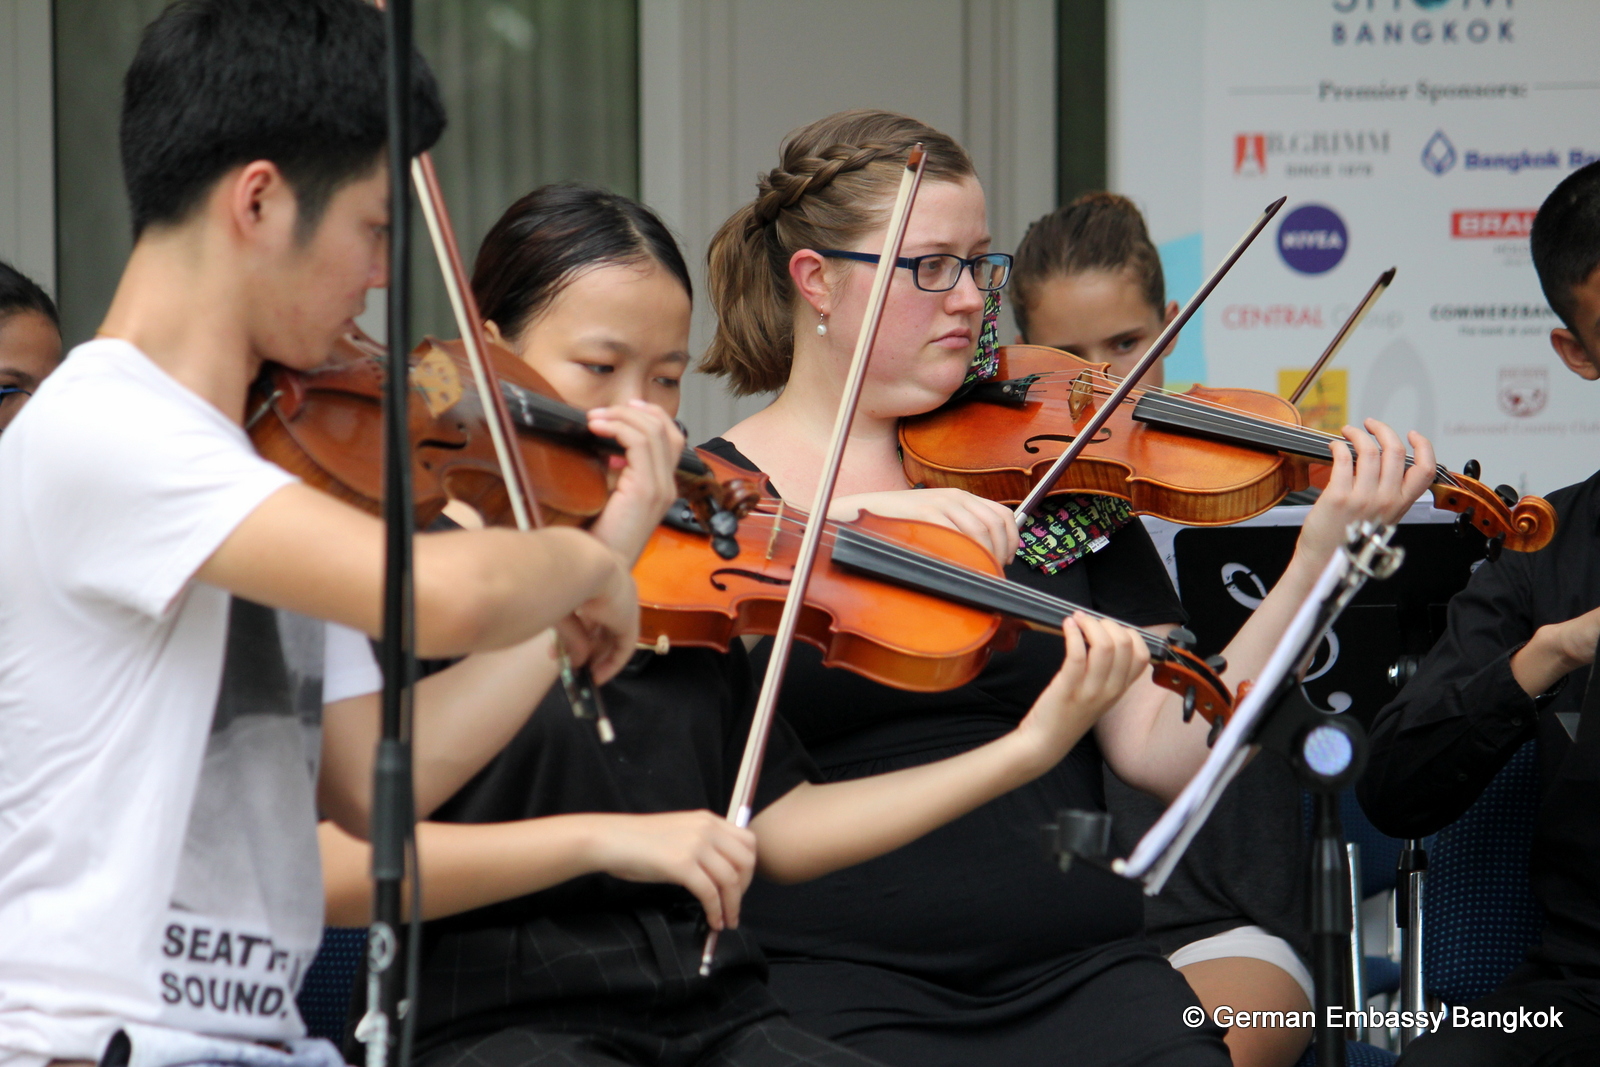 The Immanuel School Orchestra members thrilled the audience with their enthusiasm and musical talent.